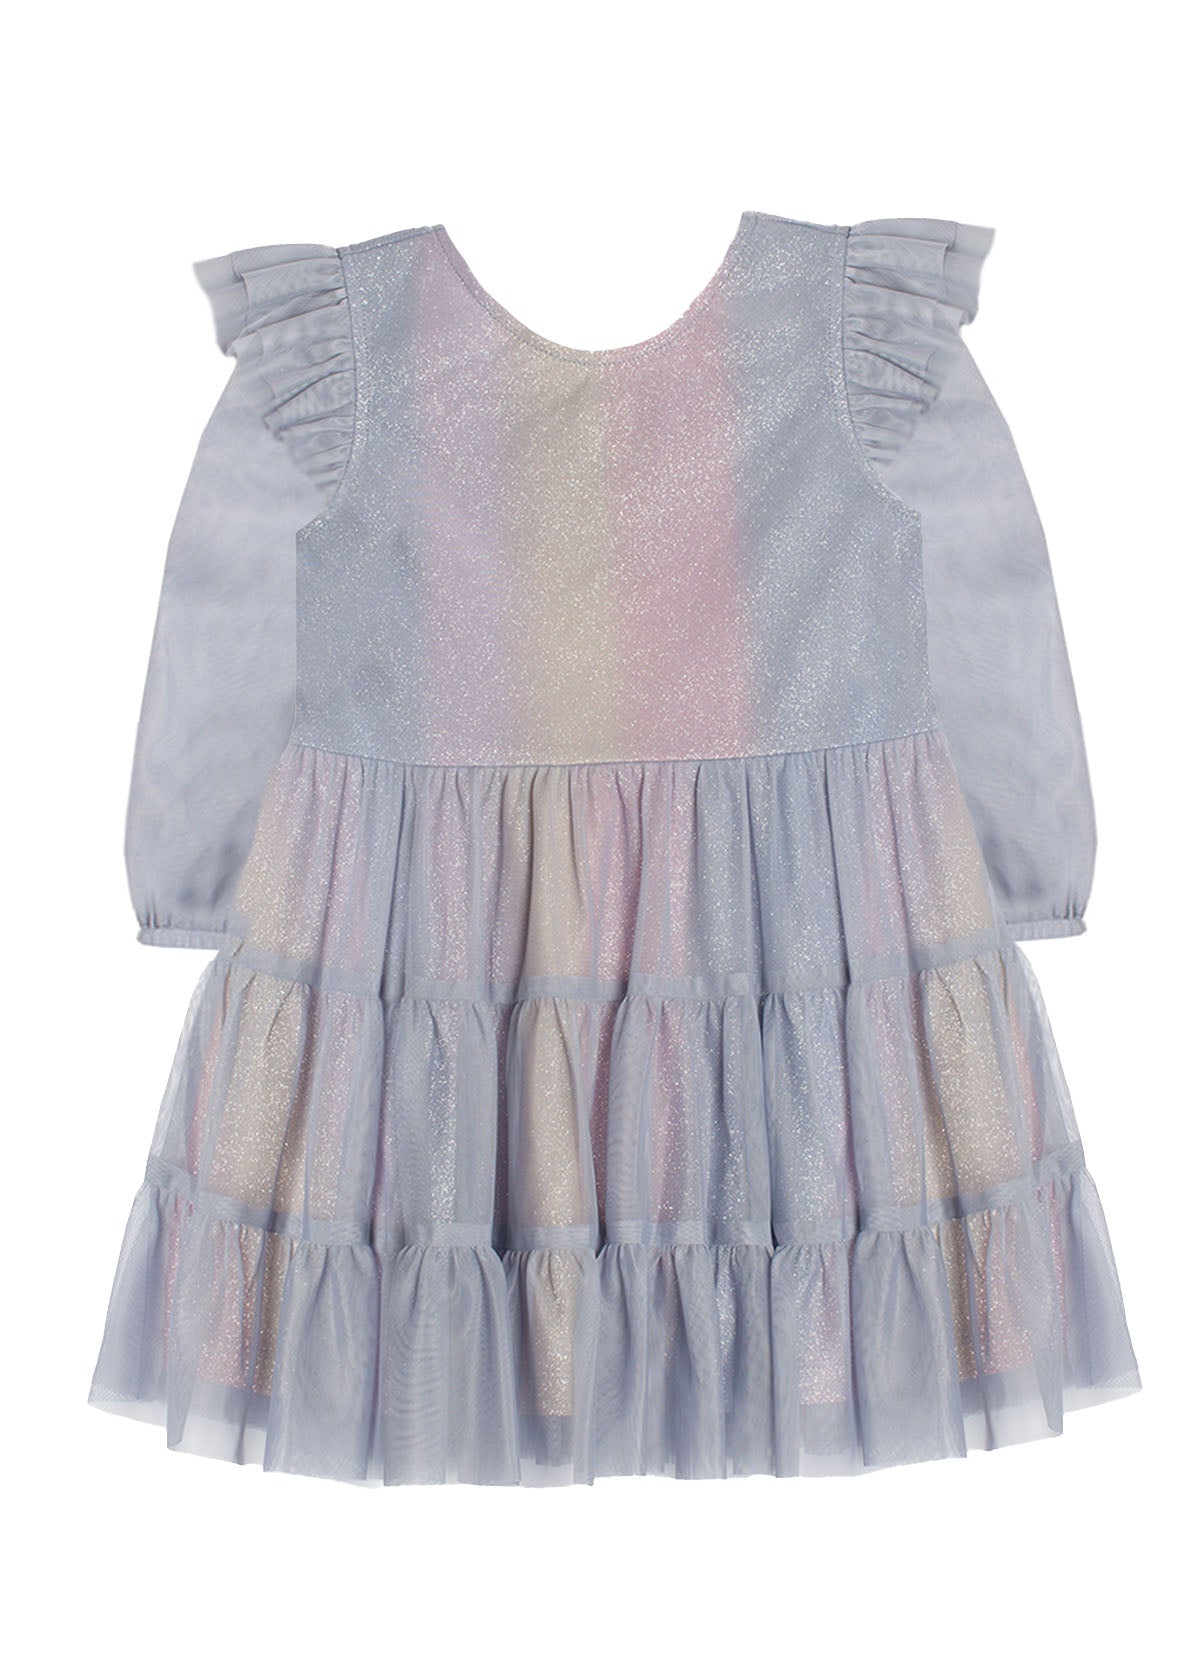 Phoenix Tiered Soft Tulle and Sparkling Dress